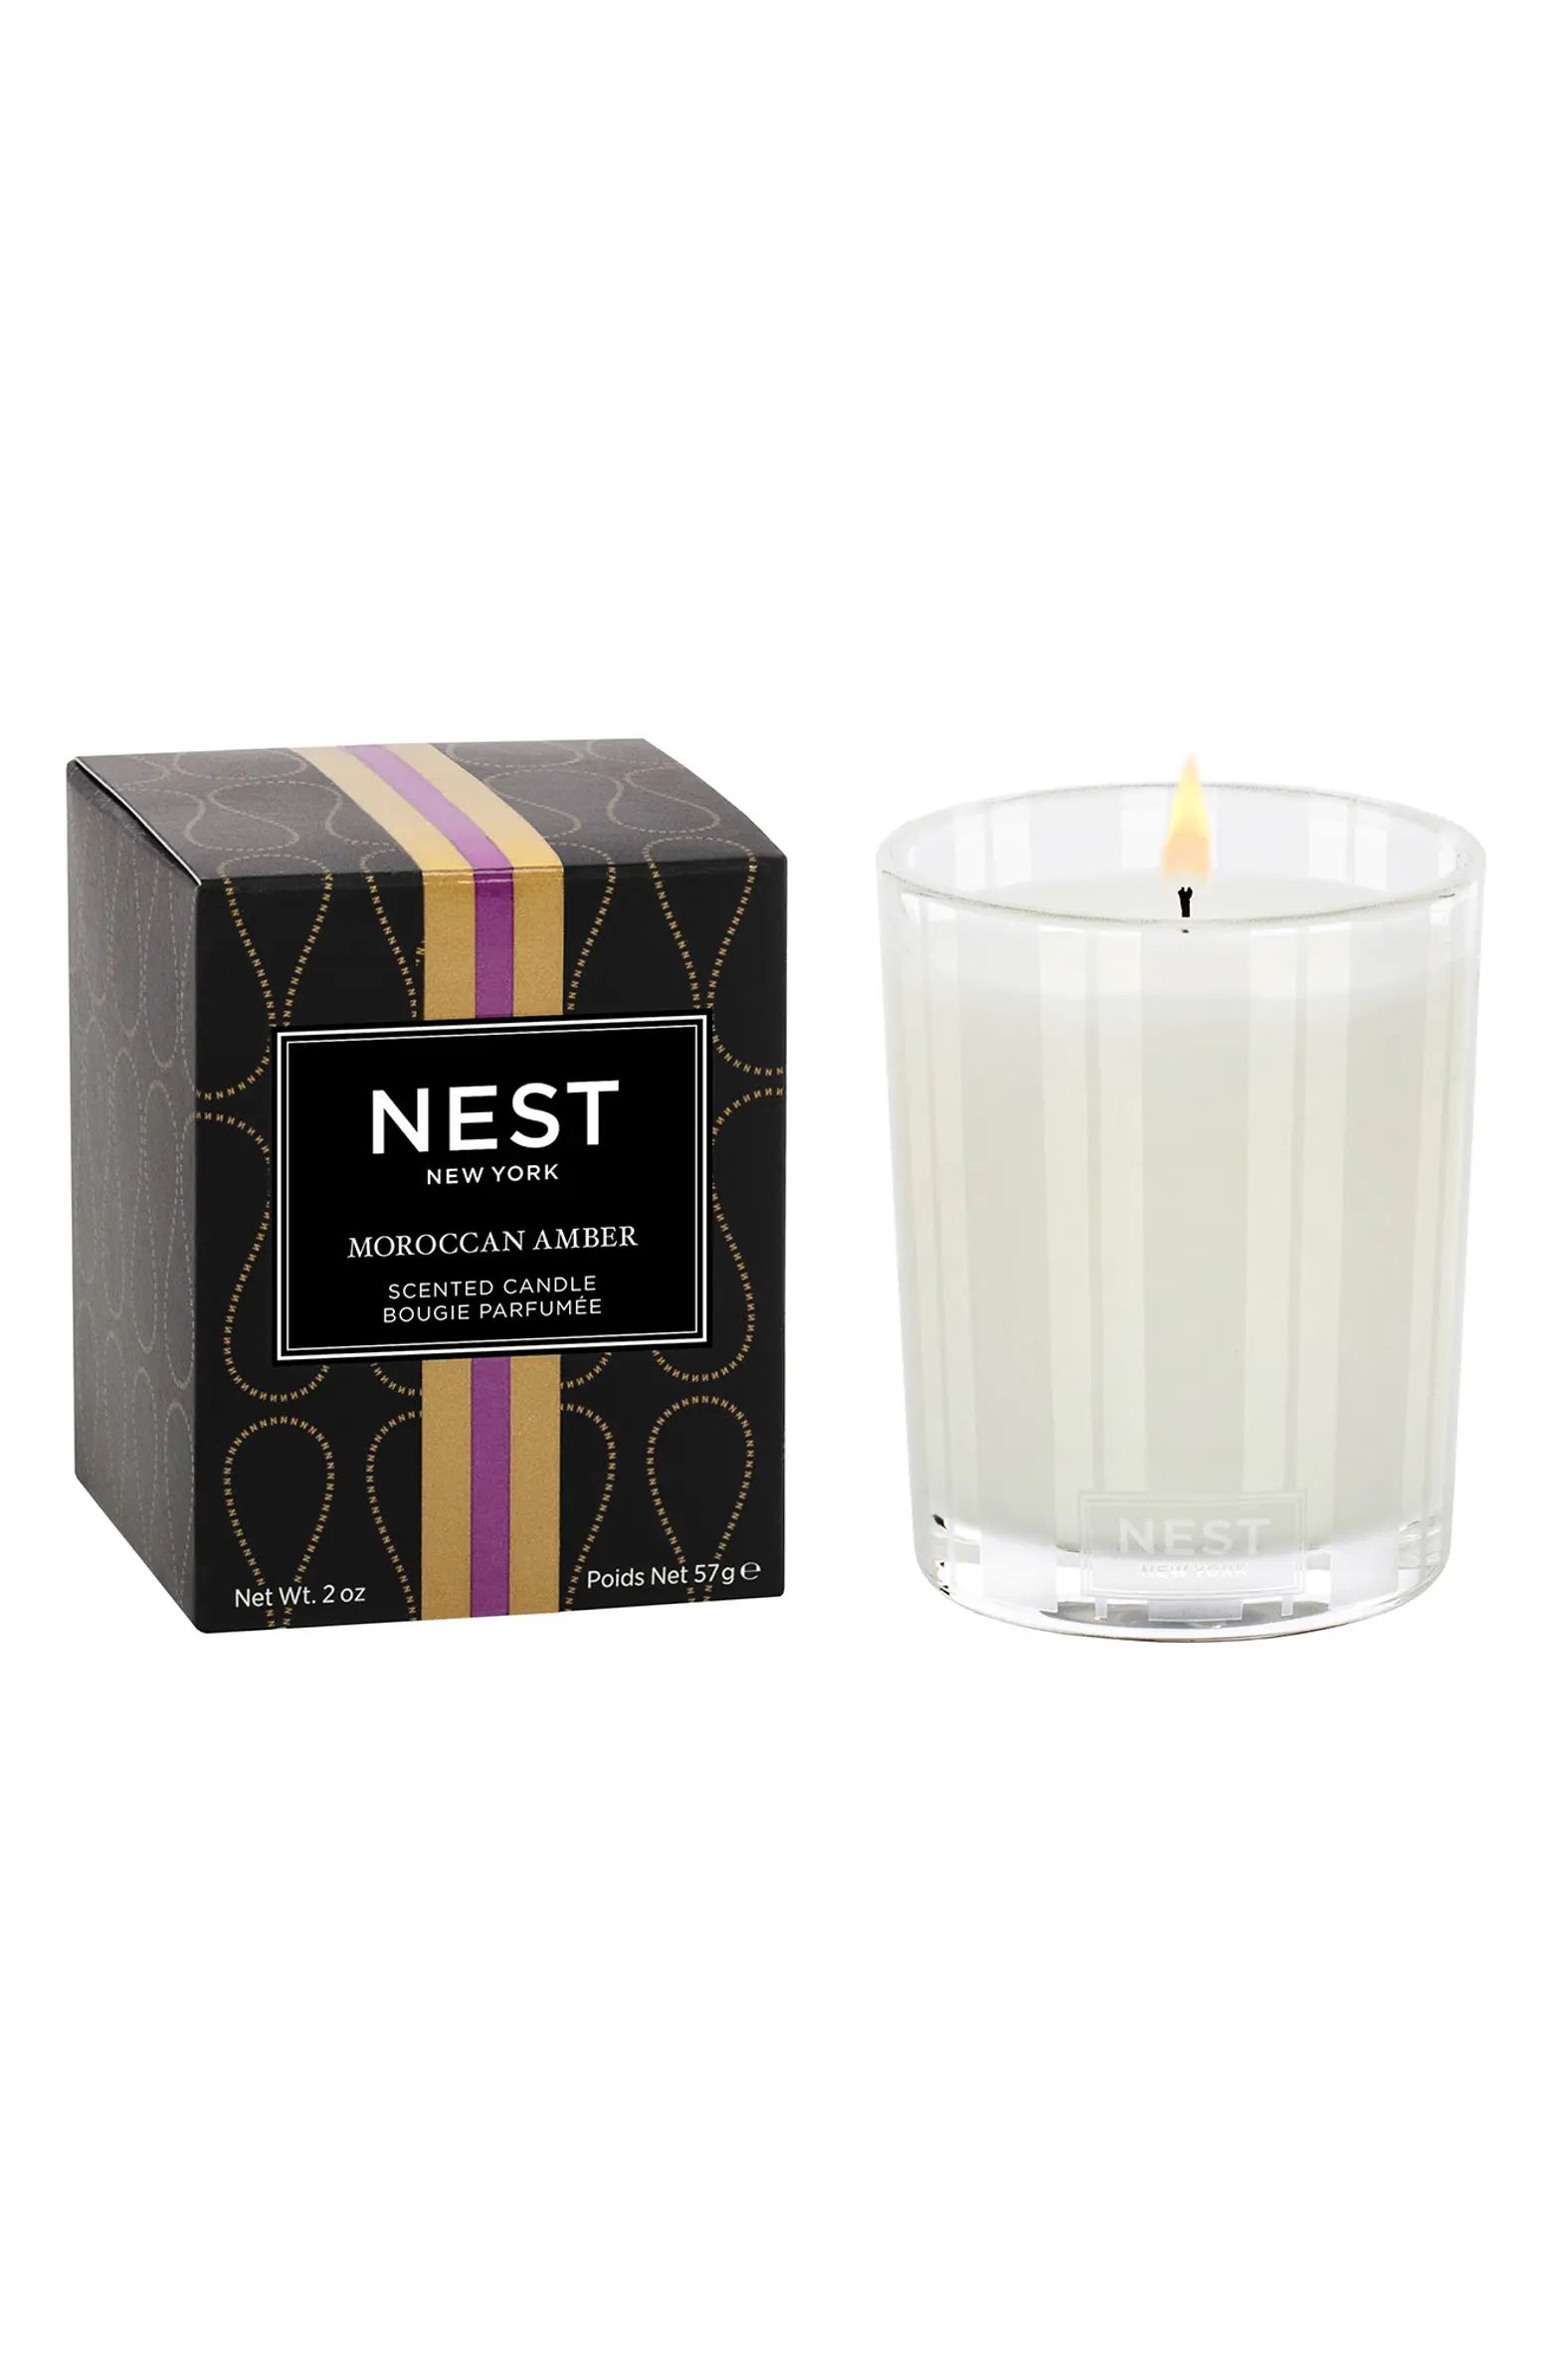 Moroccan Amber Scented Candle | Nordstrom Rack